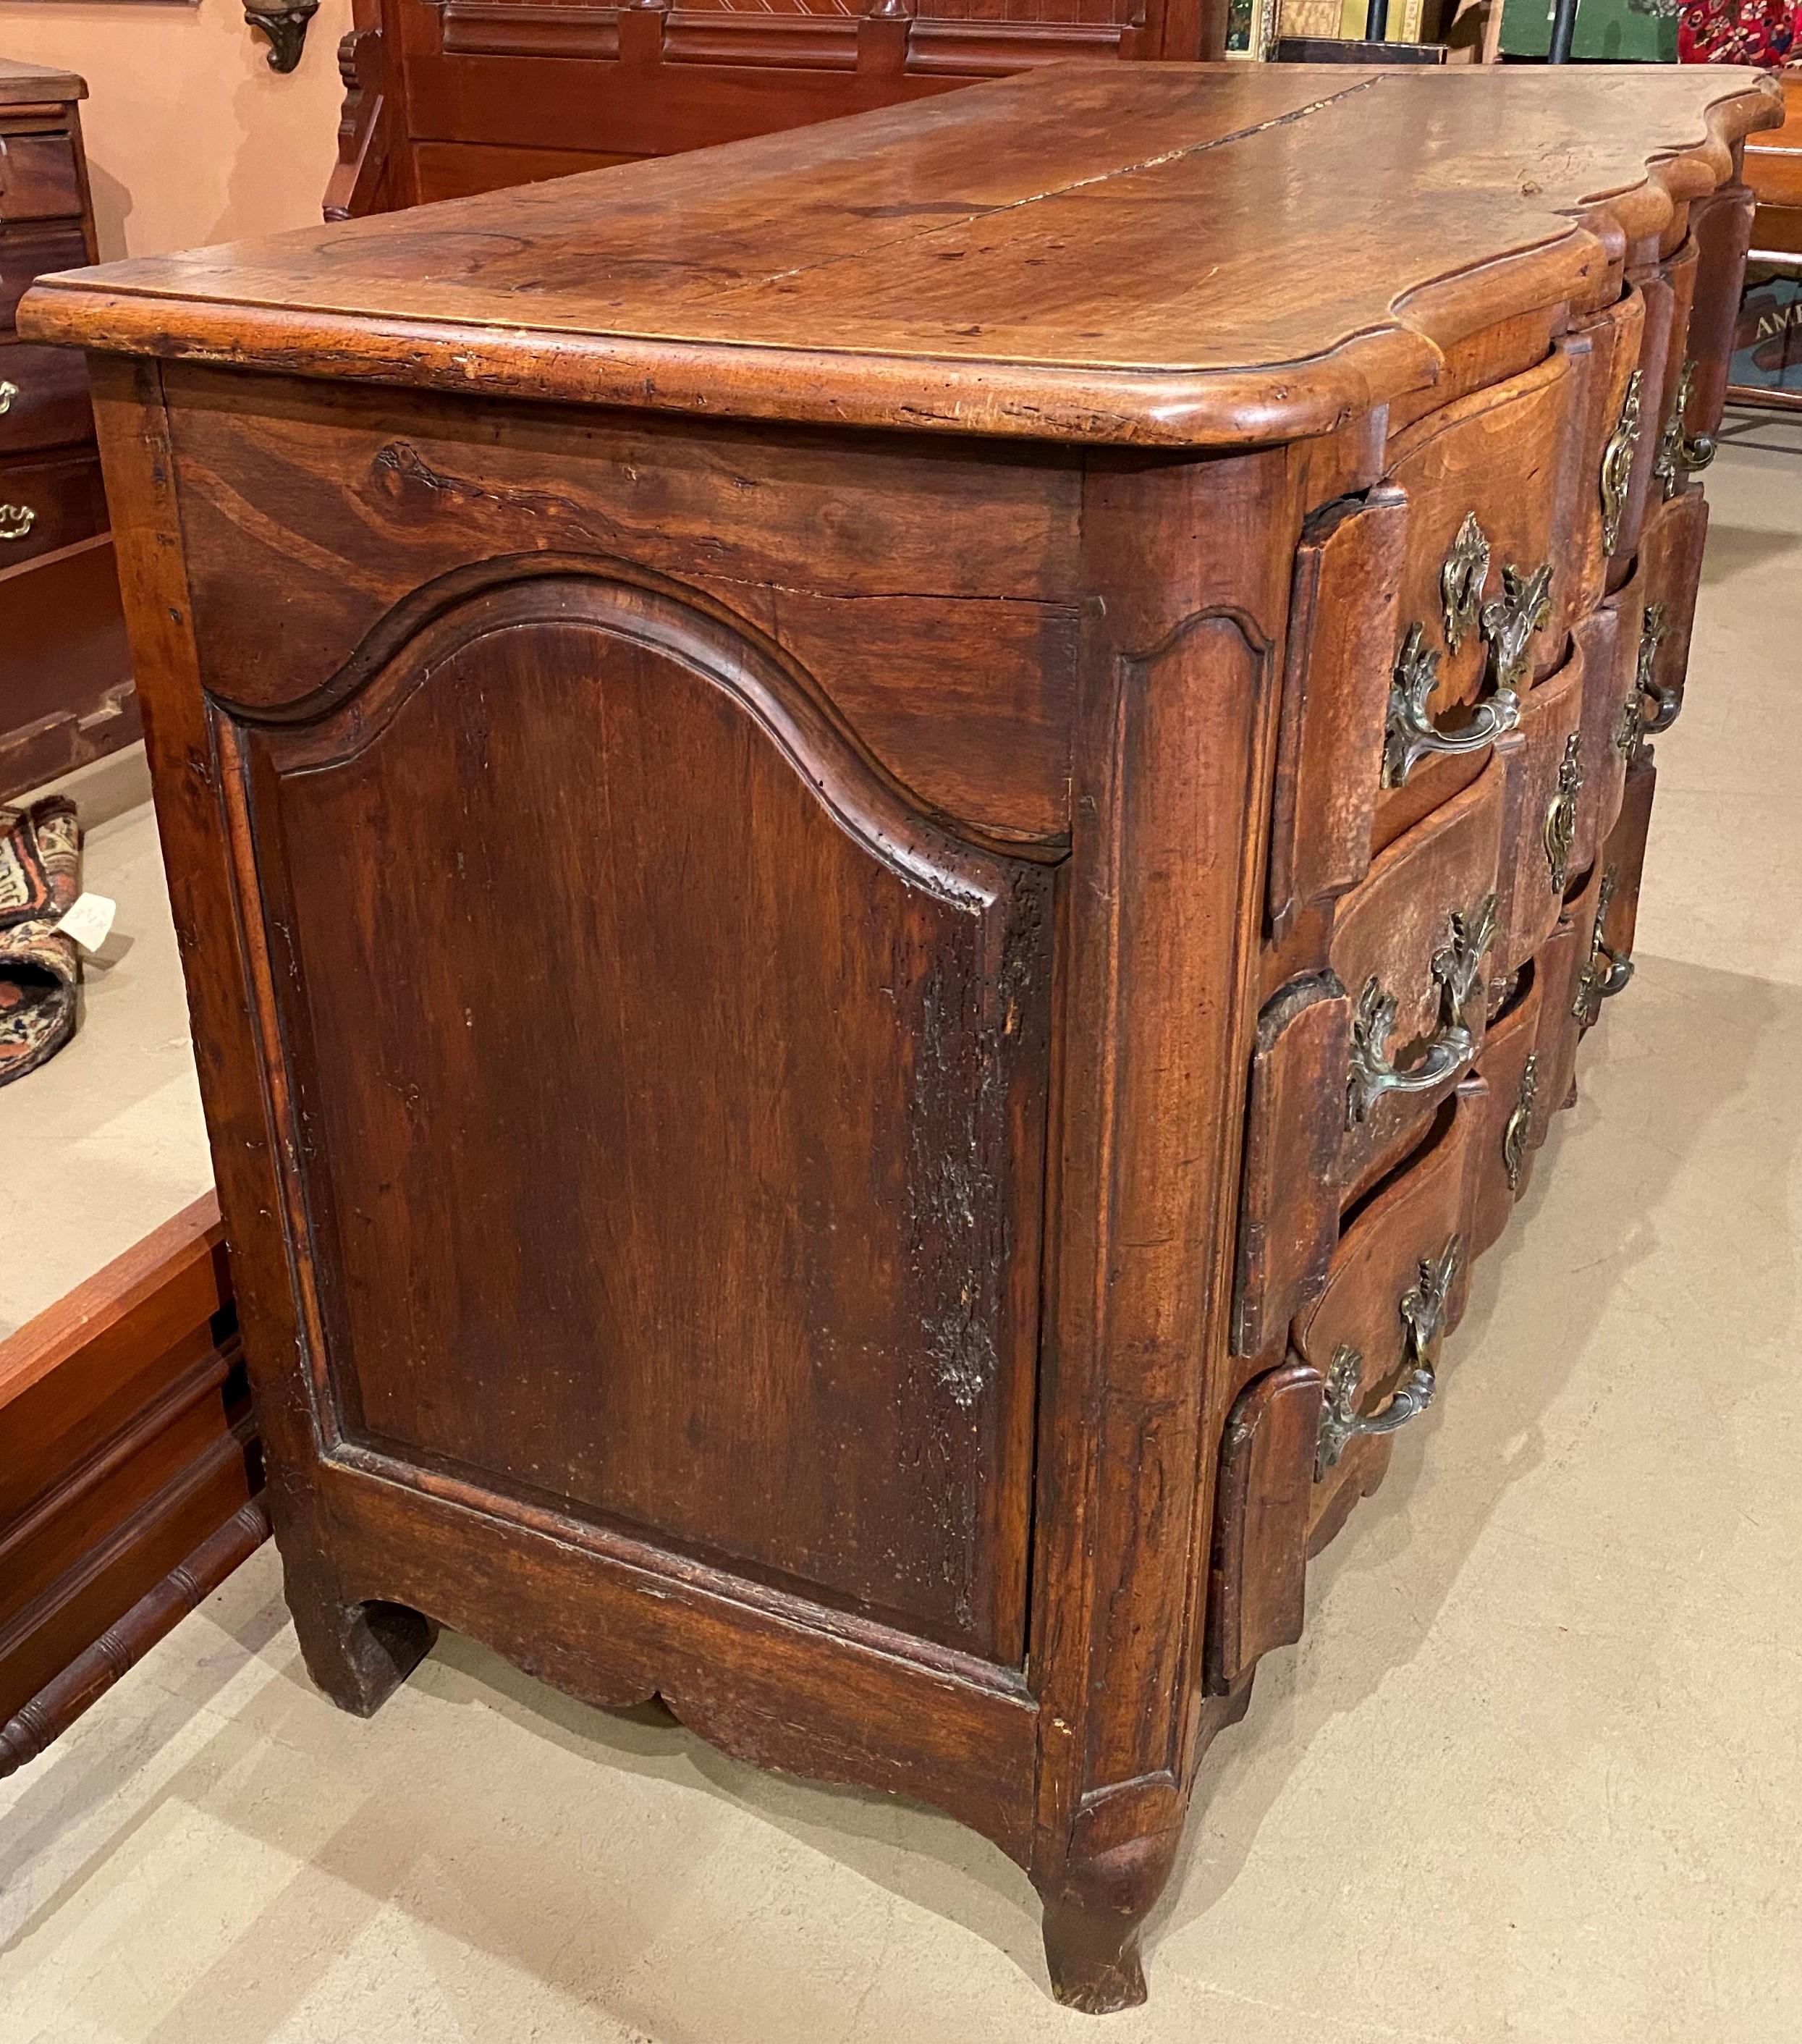 A wonderful French Provincial walnut commode with serpentine front and conforming molded edge top, surmounting three fitted top drawers (one of which is hidden in the center), over two additional long drawers, all with original bold foliate bronze